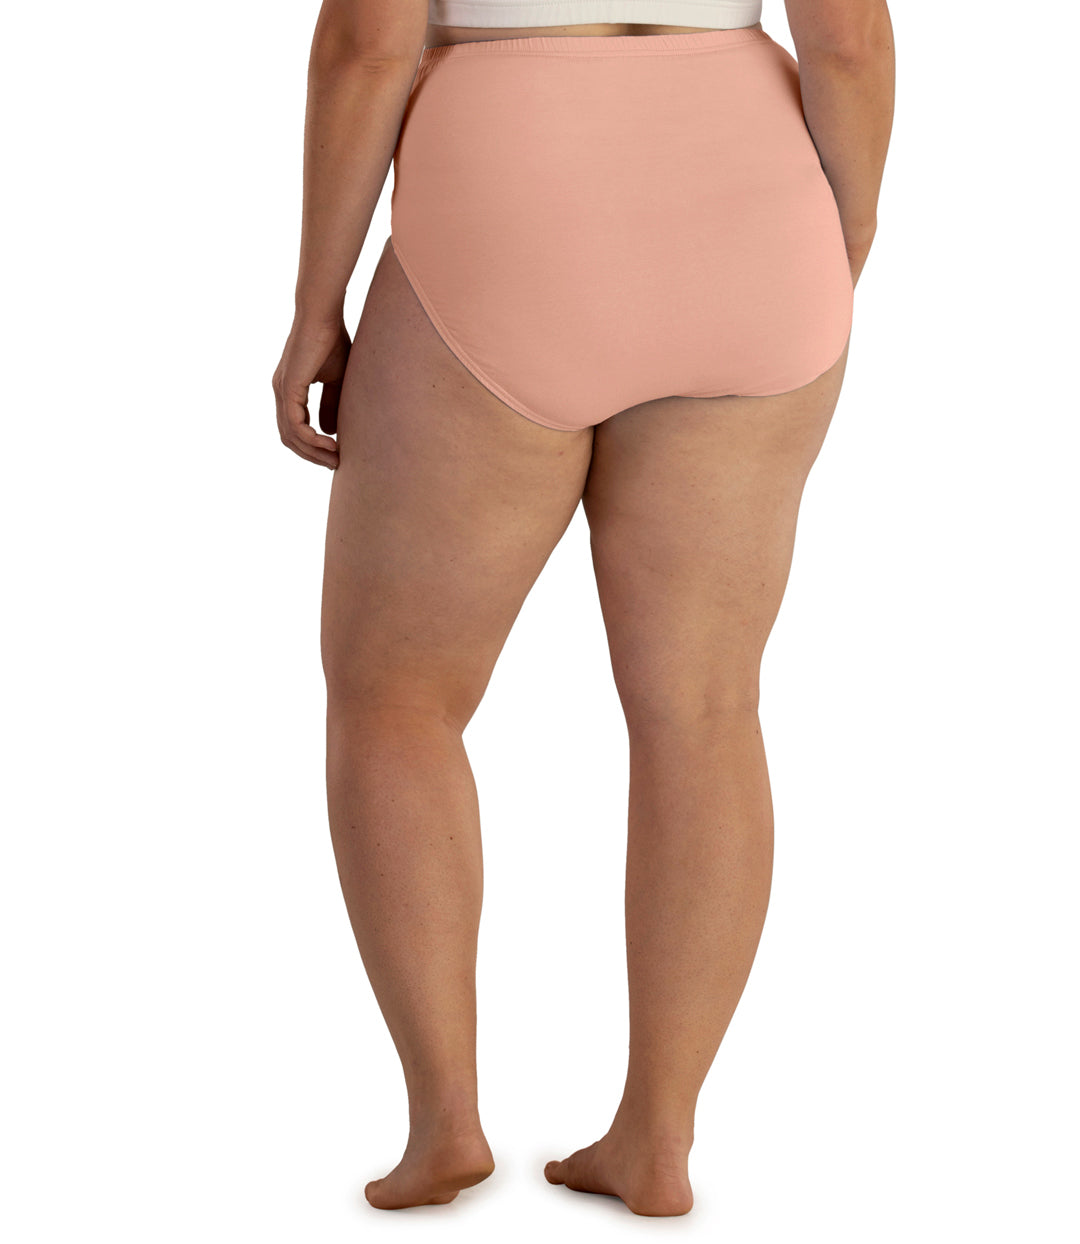 Bottom half of plus sized woman, back view, wearing JunoActive Junowear Hush Full Fit Briefs in peach. This brief has a high waist fit with conservative leg opening.